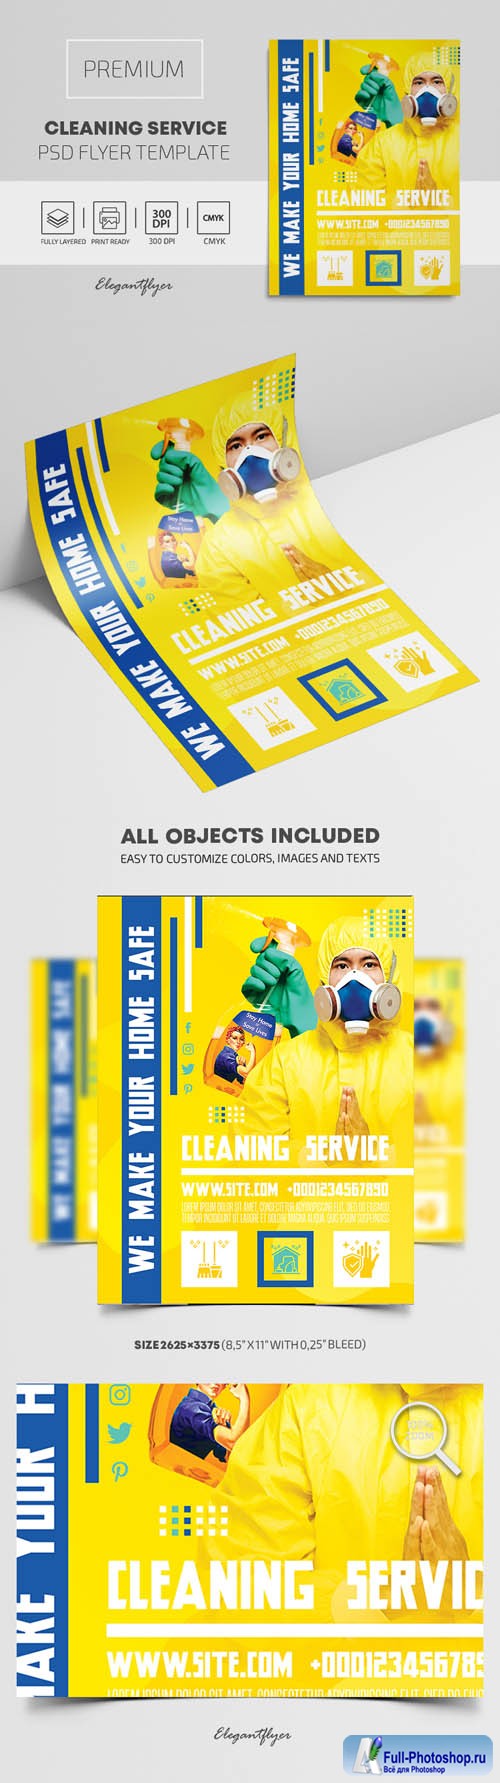 Cleaning Service Flyer PSD Template